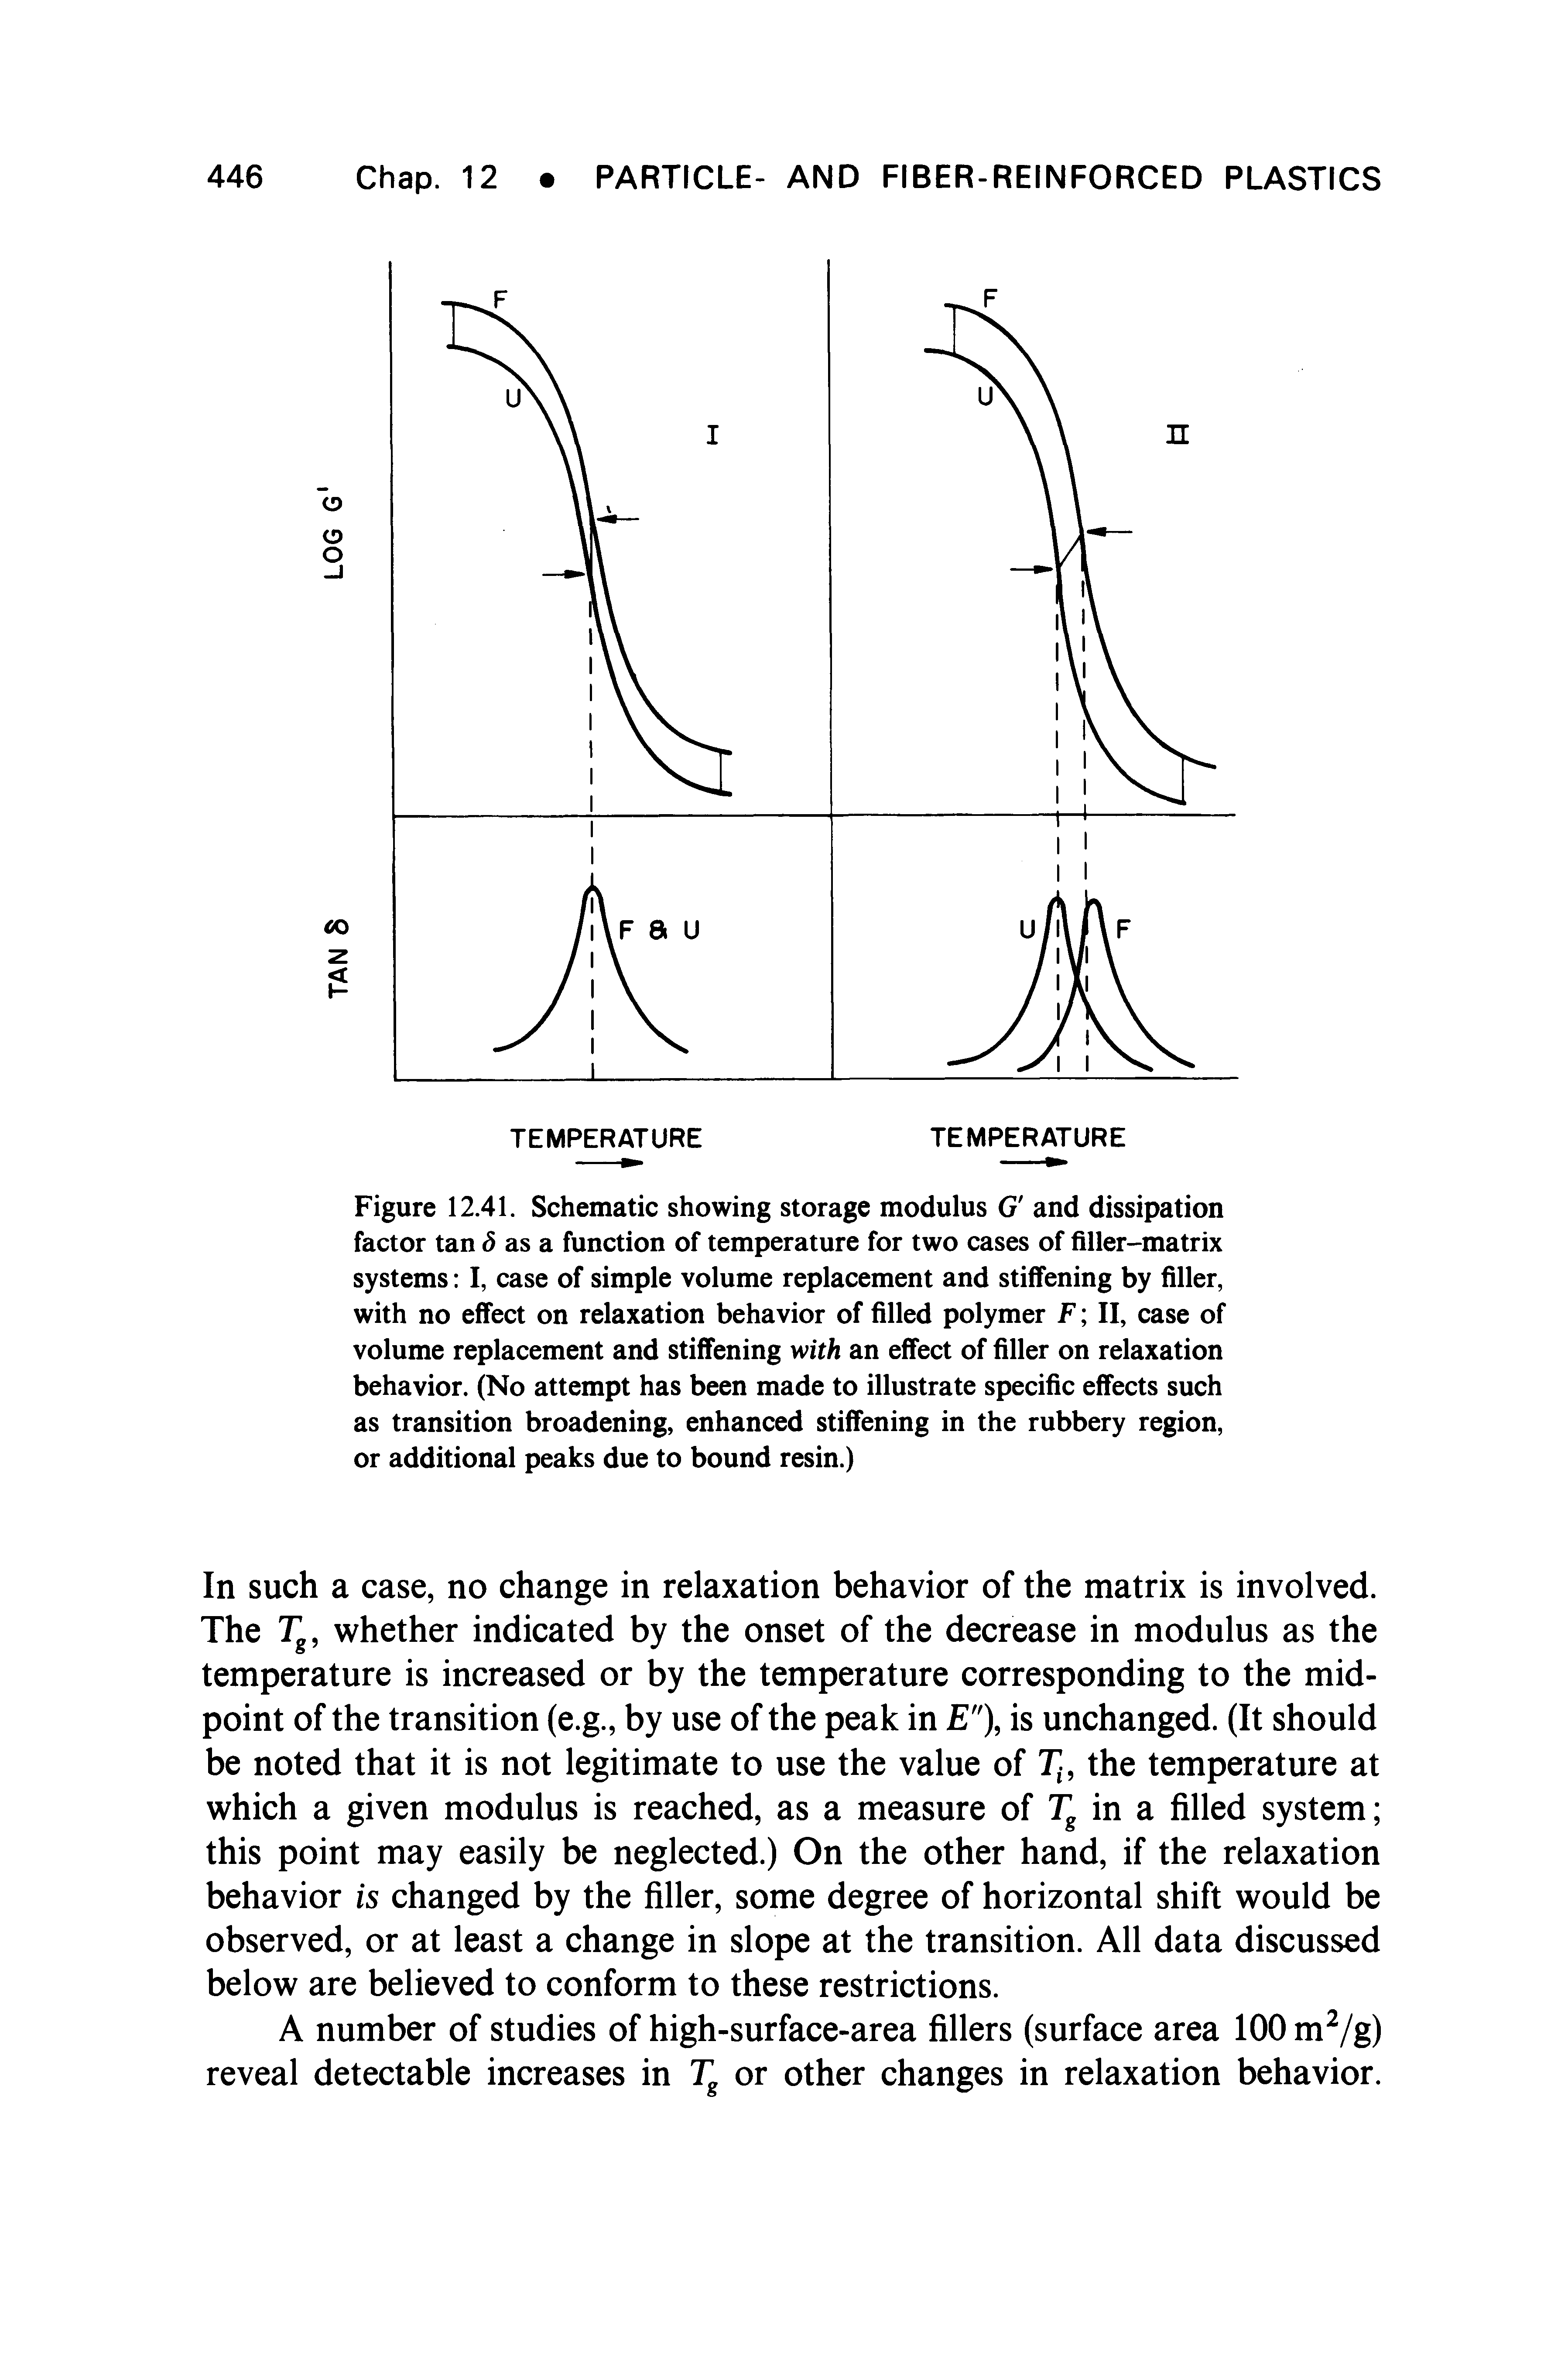 Figure 12.41. Schematic showing storage modulus G and dissipation factor tan 5 as a function of temperature for two cases of filler-matrix systems I, case of simple volume replacement and stiffening by filler, with no effect on relaxation behavior of filled polymer F II, case of volume replacement and stiffening with an effect of filler on relaxation behavior. (No attempt has been made to illustrate specific effects such as transition broadening, enhanced stiffening in the rubbery region, or additional peaks due to bound resin.)...